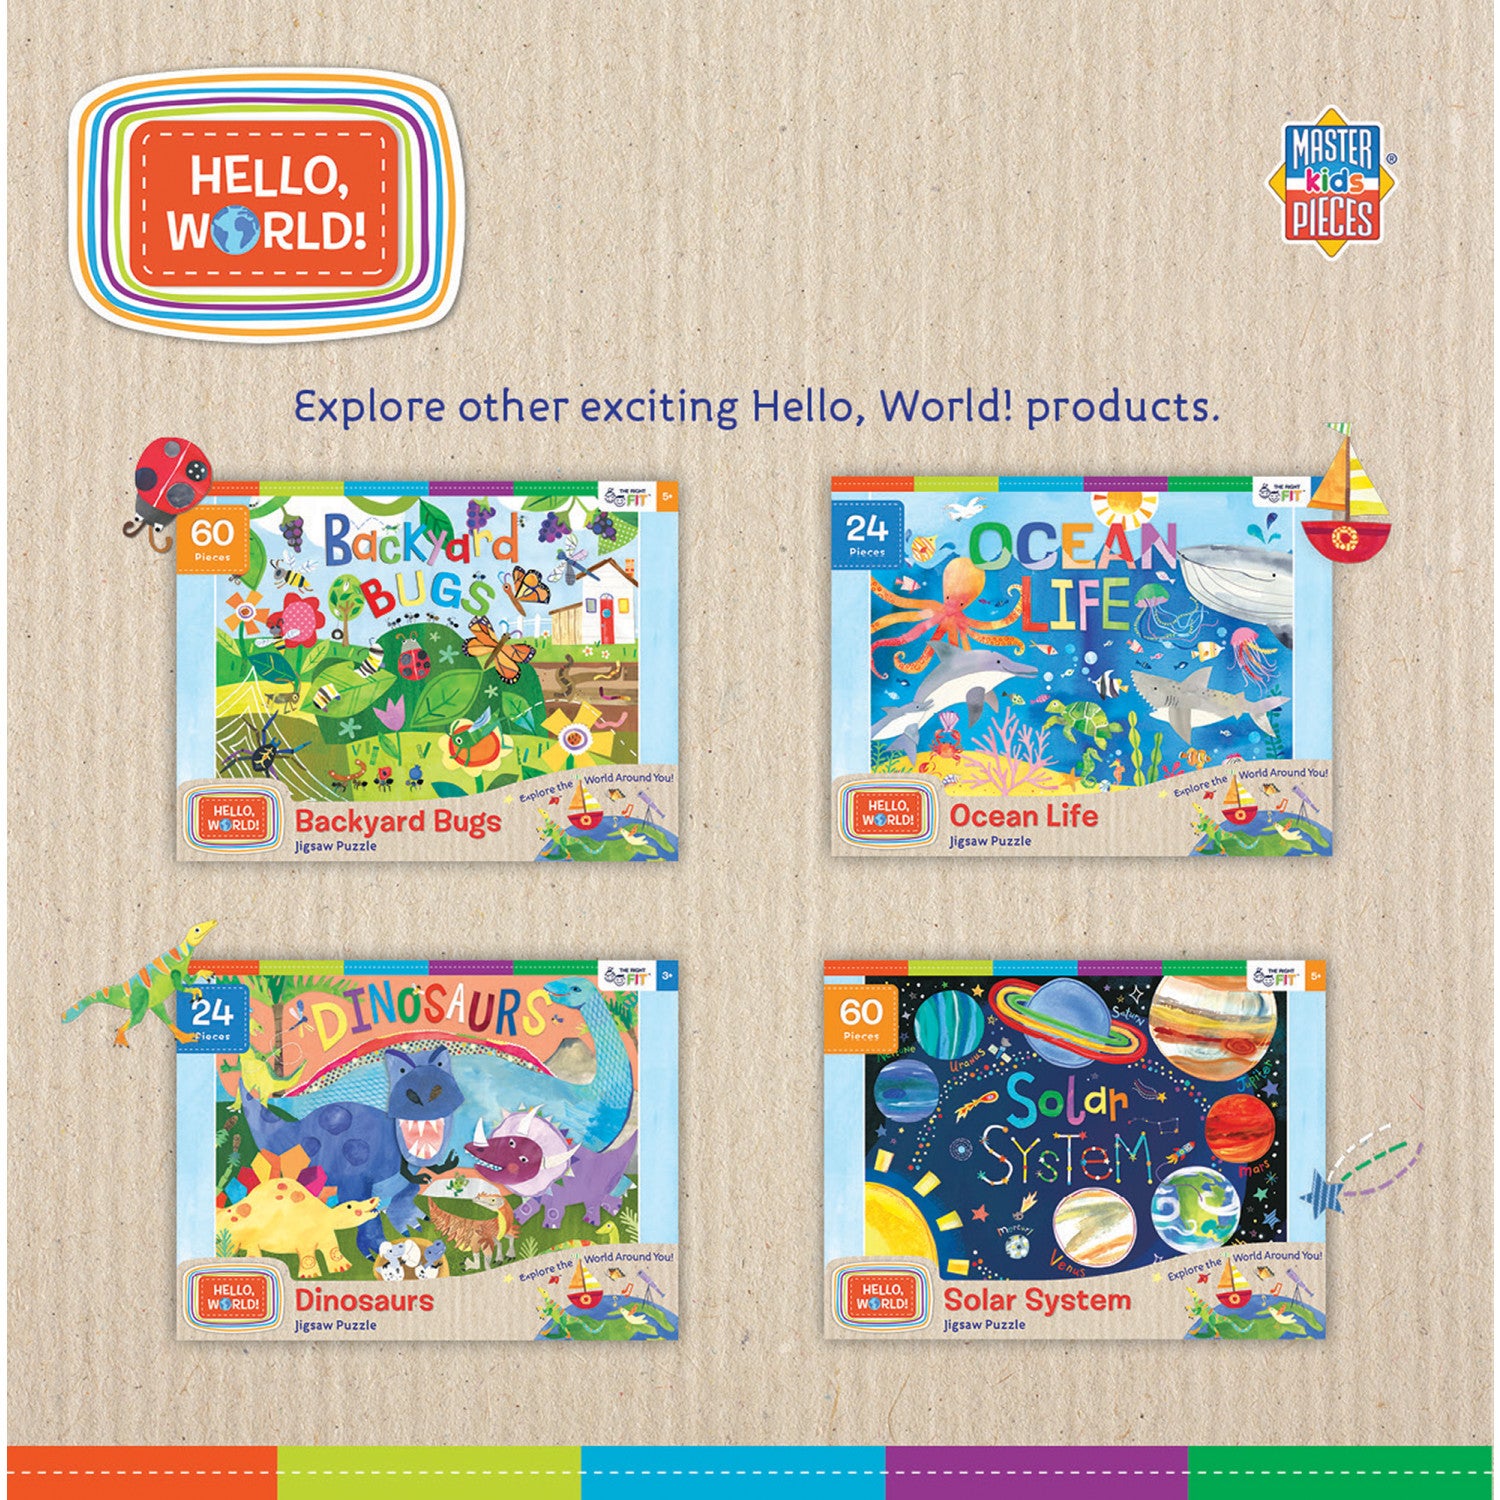 Hello, World! 100 Piece Jigsaw Puzzles 4-Pack